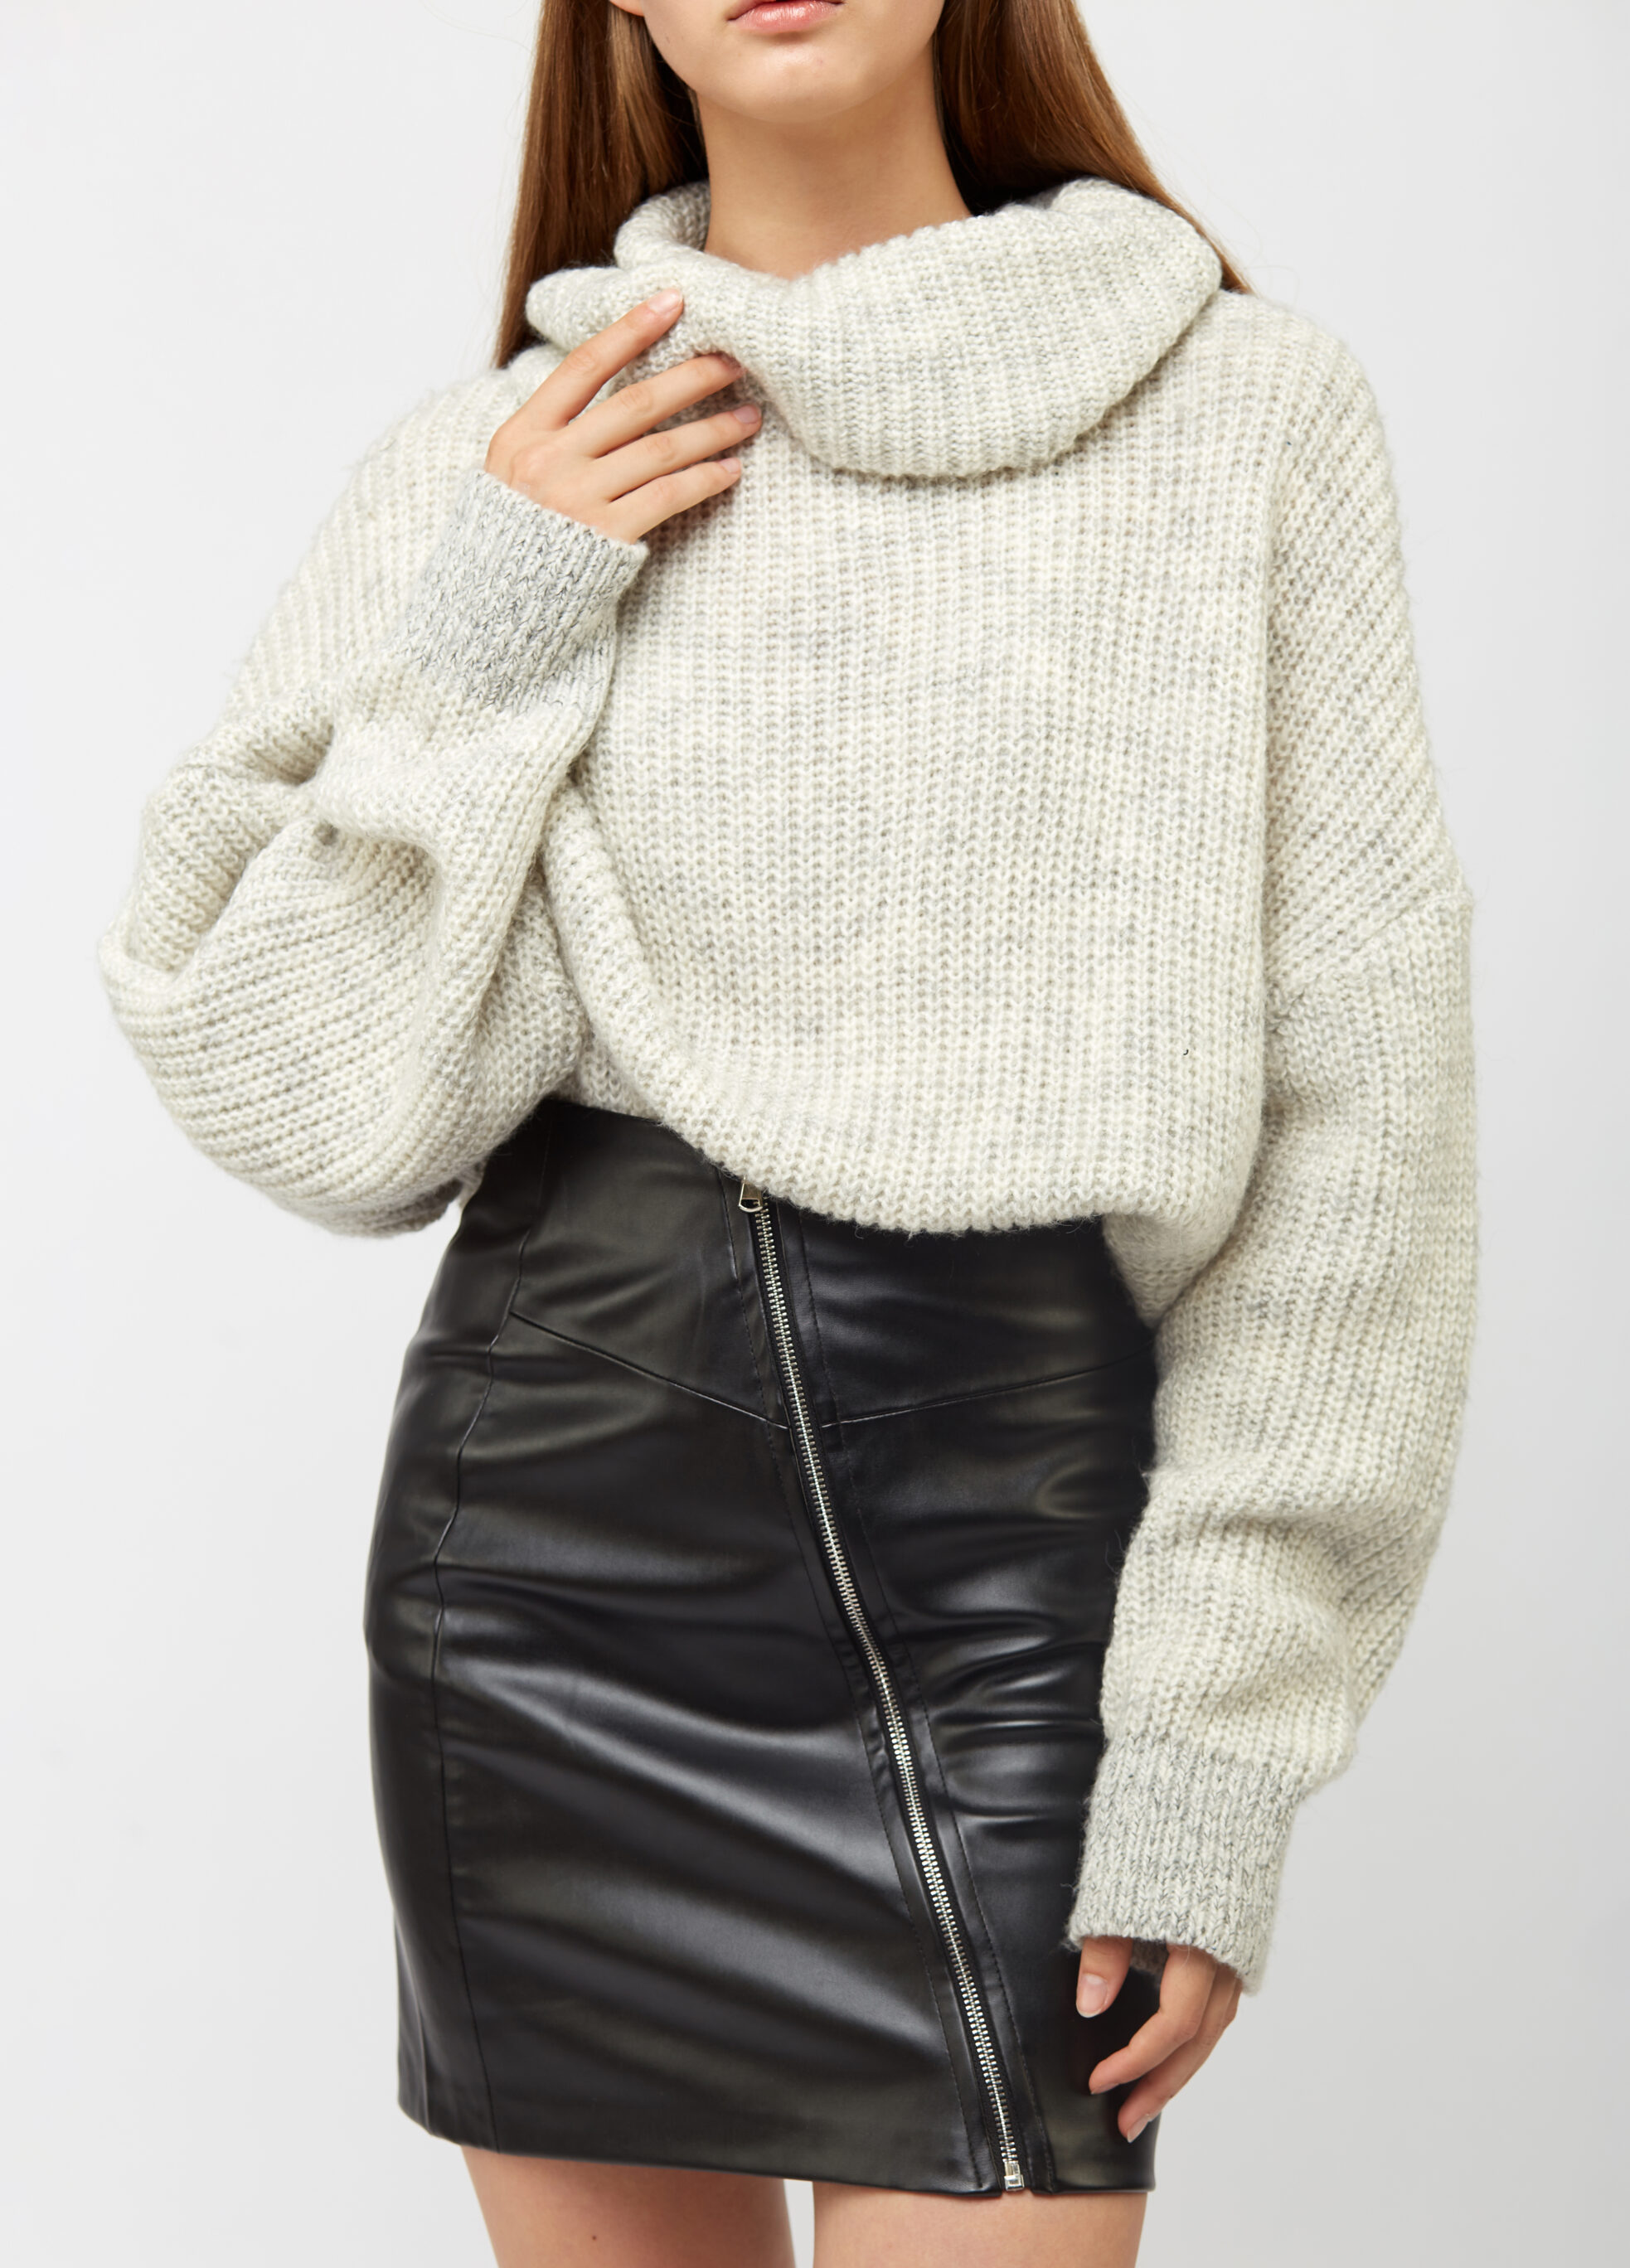 A Leather Skirt and Sweater